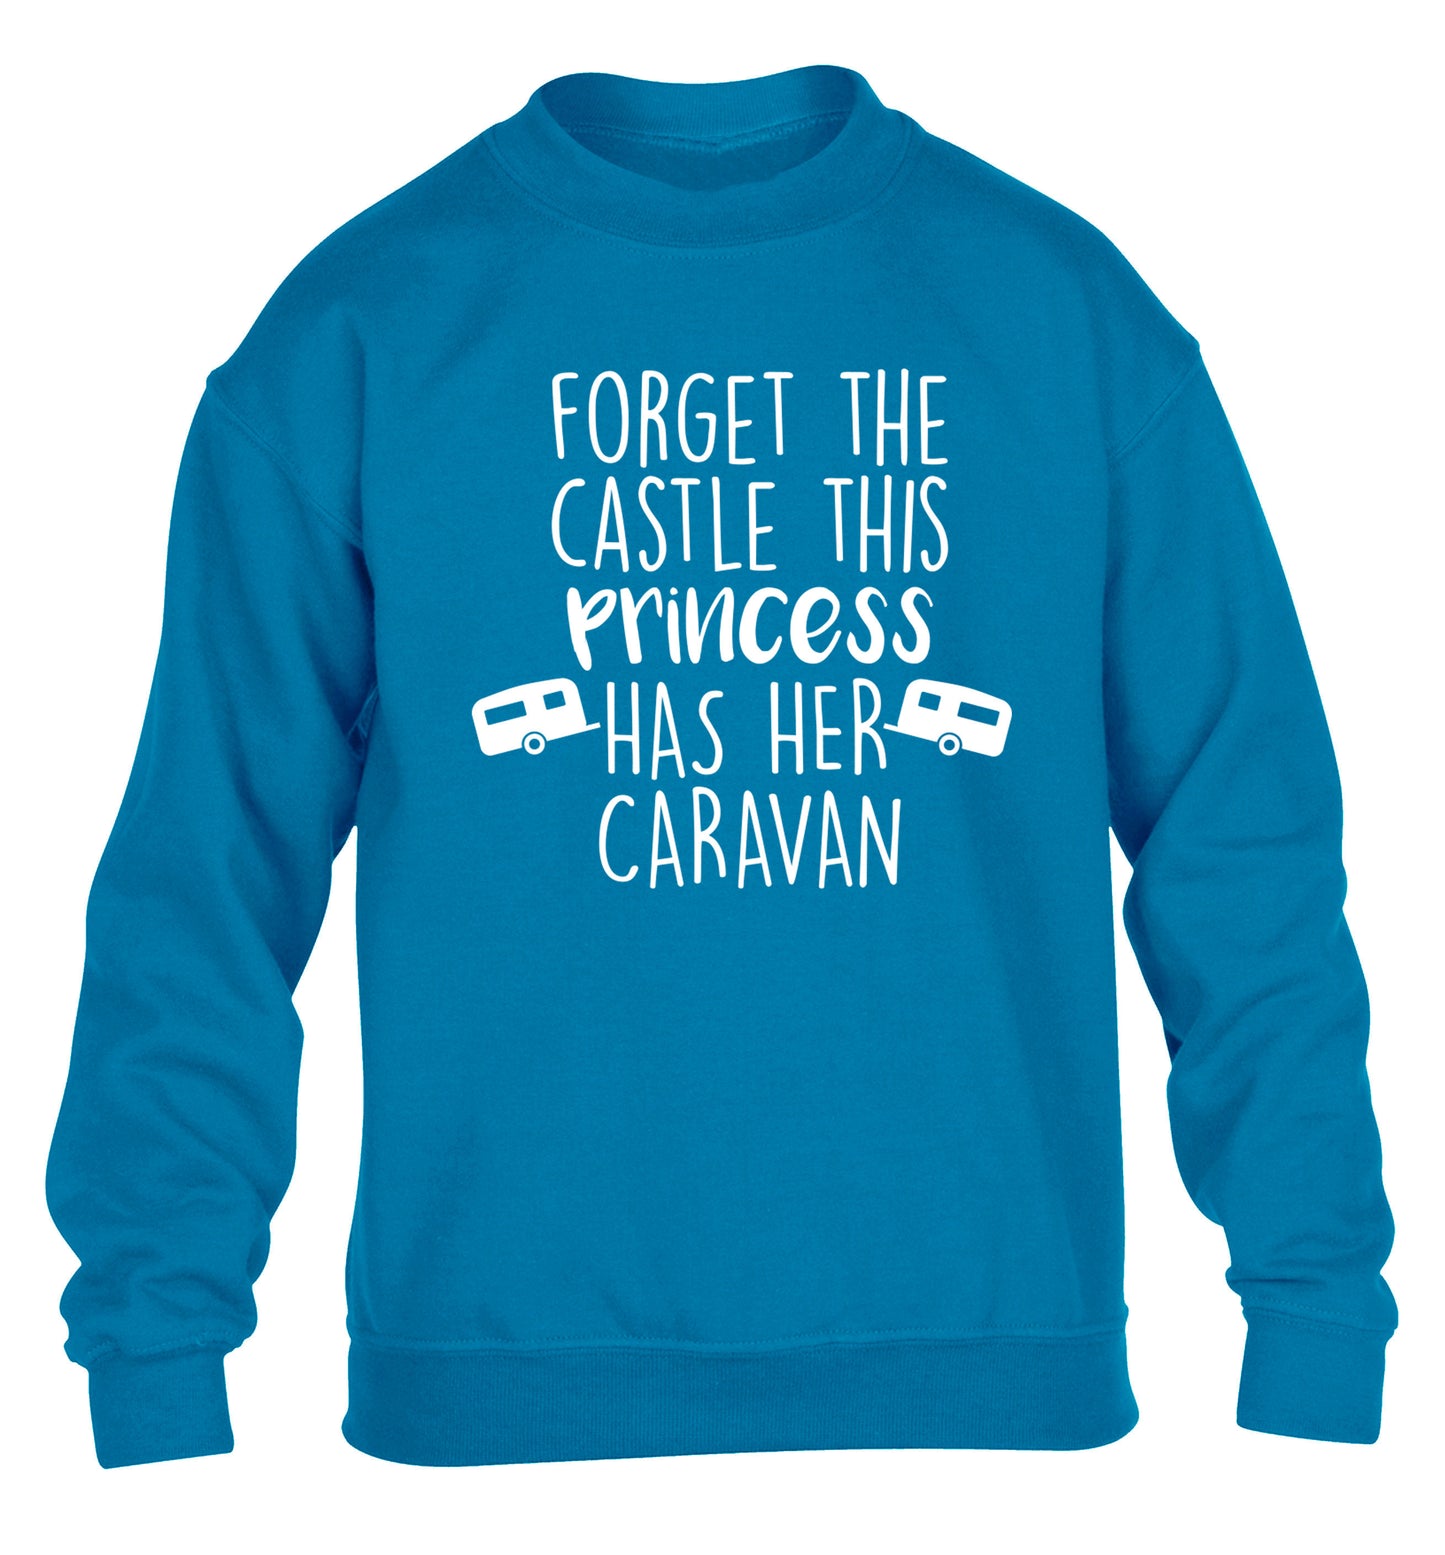 Forget the castle this princess lives at the caravan children's blue sweater 12-14 Years